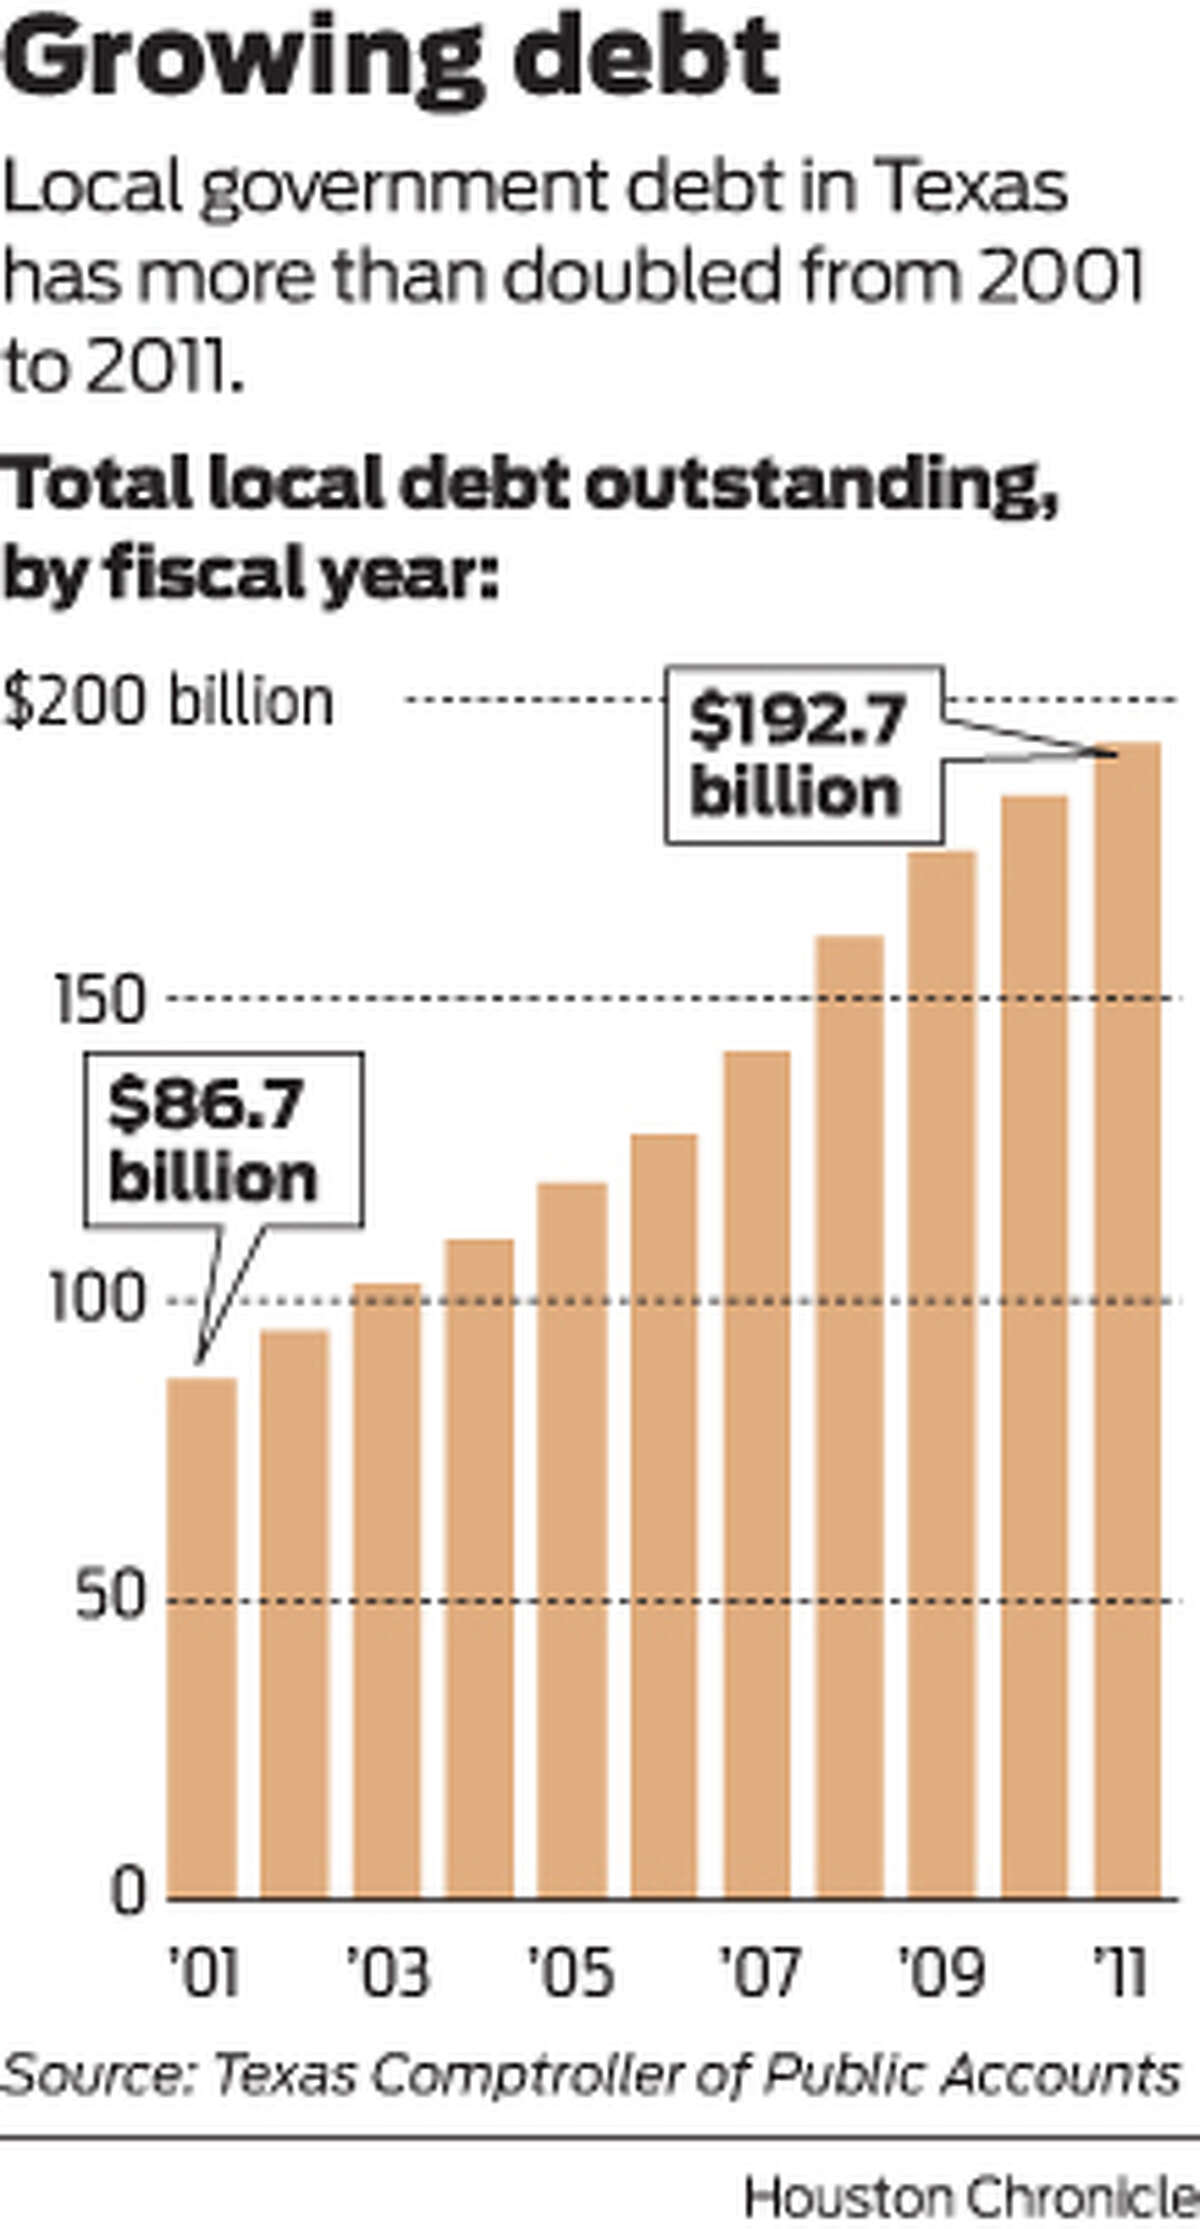 Local government debt in Texas has more than doubled from 2001 to 2011. 